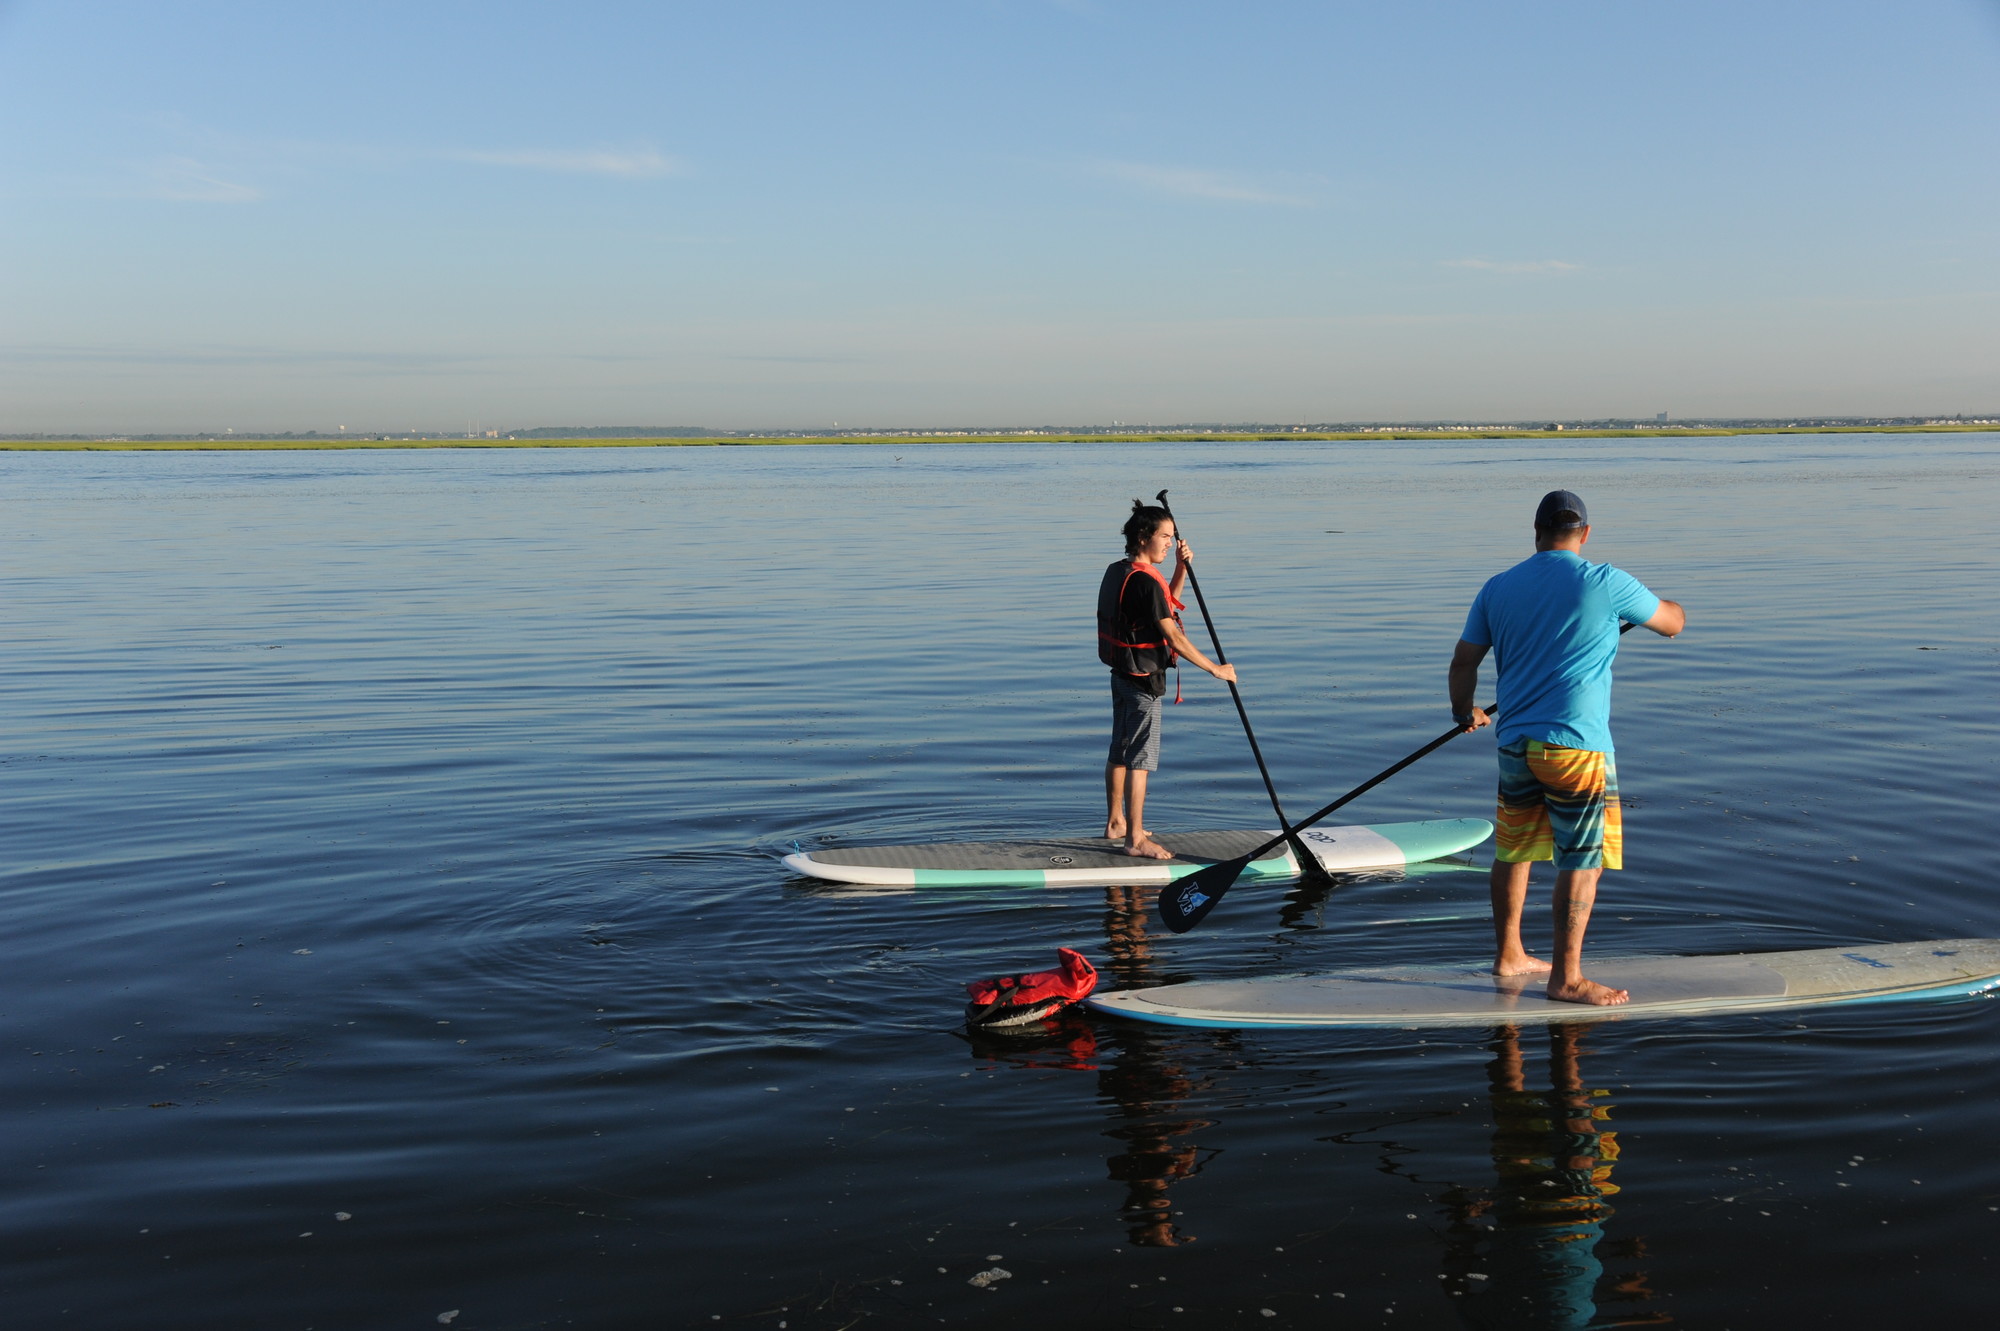 Herald intern Ryan Pane visited Jones Beach on Aug. 14 to learn how to stand-up paddle board with Epic Paddle Boarding owner Eric Leggio.